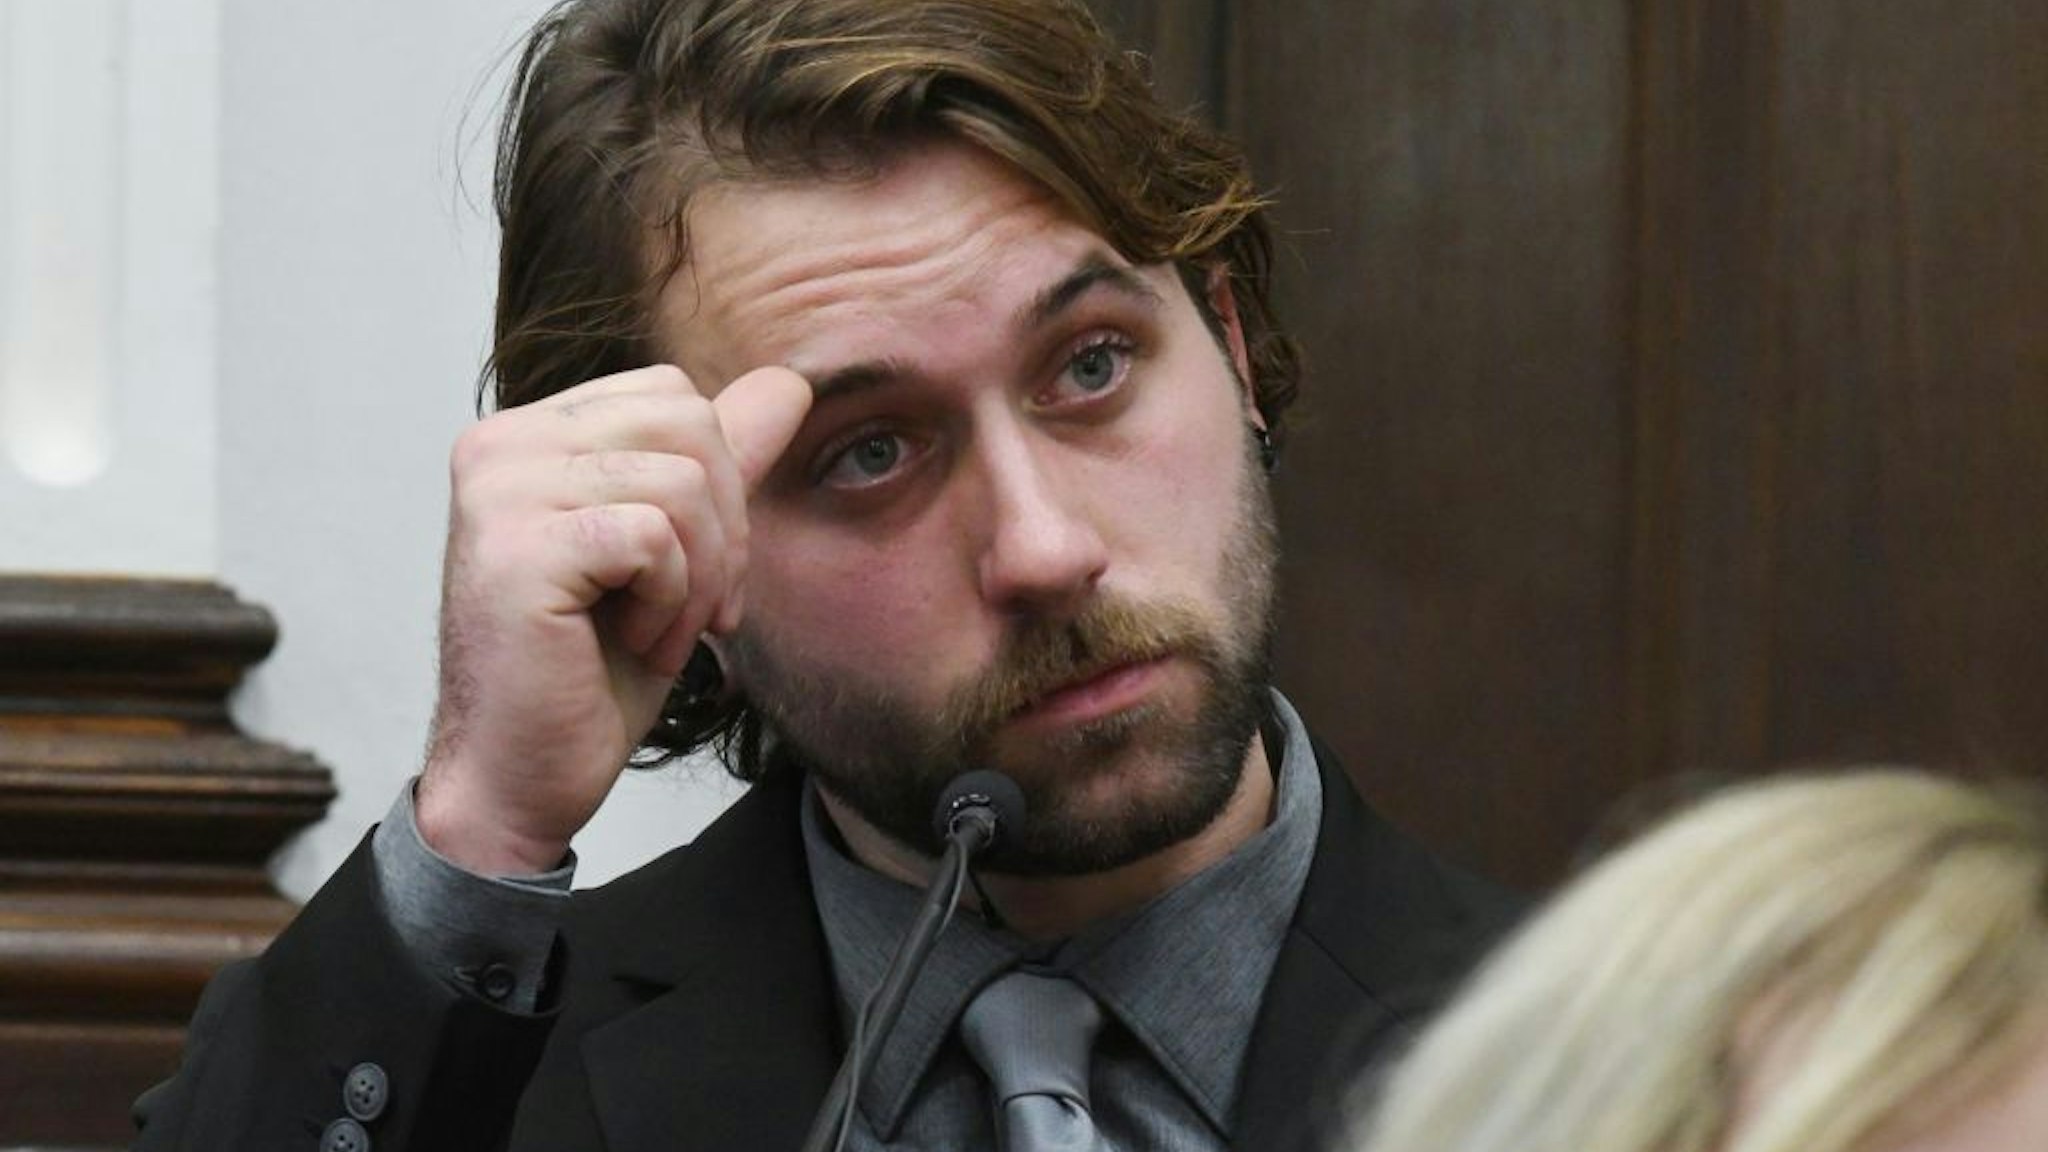 aige Grosskreutz watches video as he testifies about being shot in the right arm during the Kyle Rittenhouse trial at the Kenosha County Courthouse on November 8, 2021 in Kenosha, Wisconsin.